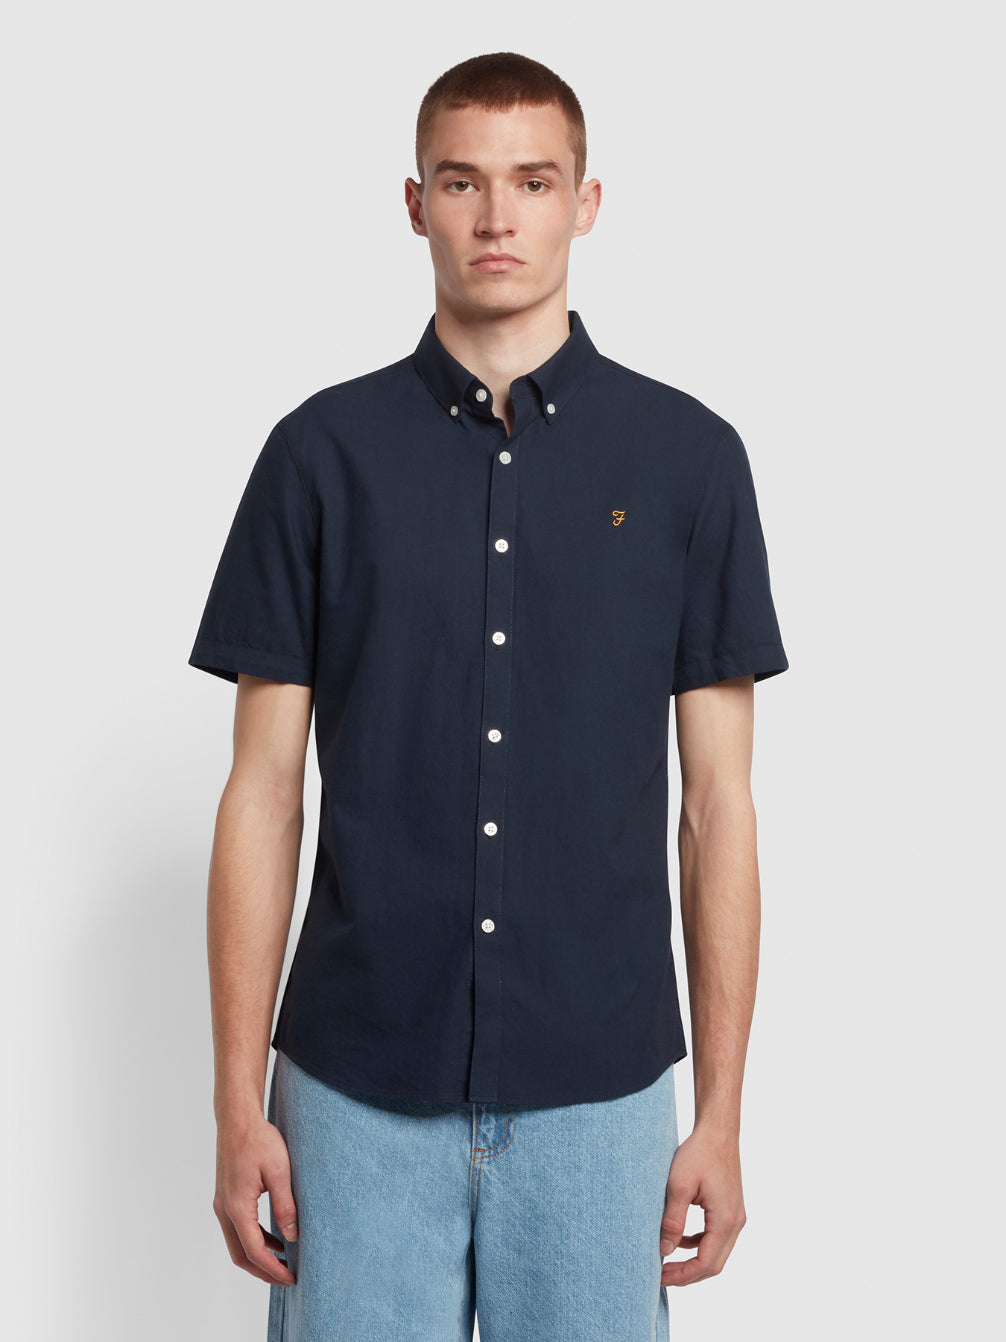 View Brewer Slim Fit Short Sleeve Organic Cotton Oxford Shirt In Navy information